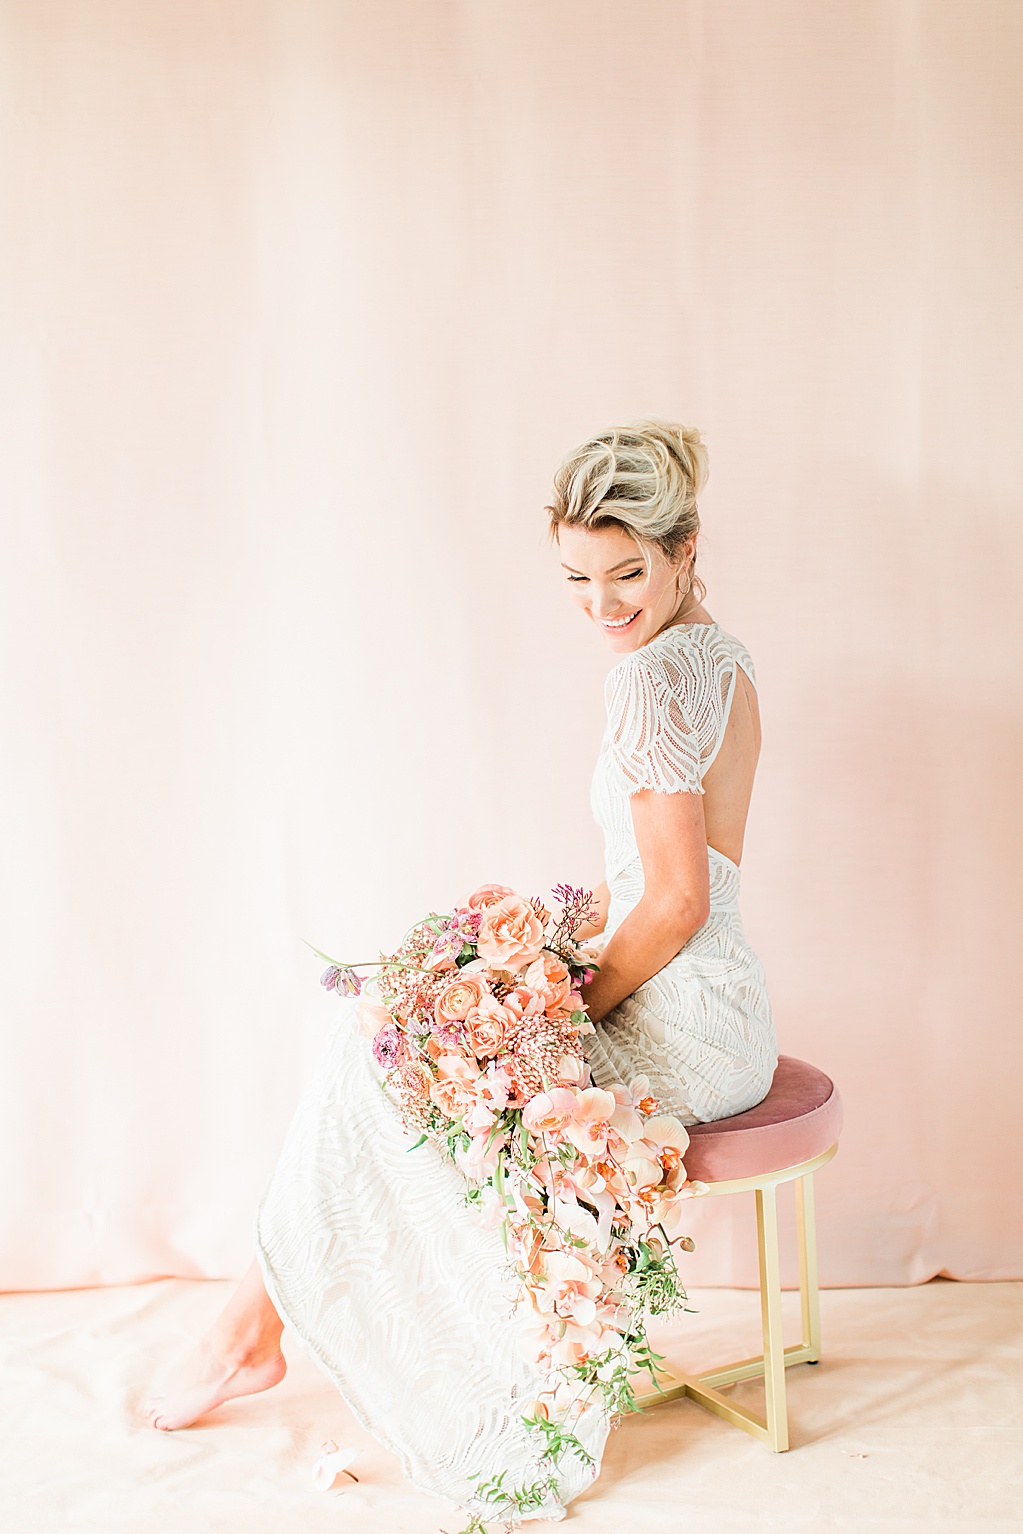 Blush mauve peach and coral wedding inspiration at Prospect House in Dripping Springs Texas wedding venue by Allison Jeffers Photography 0031